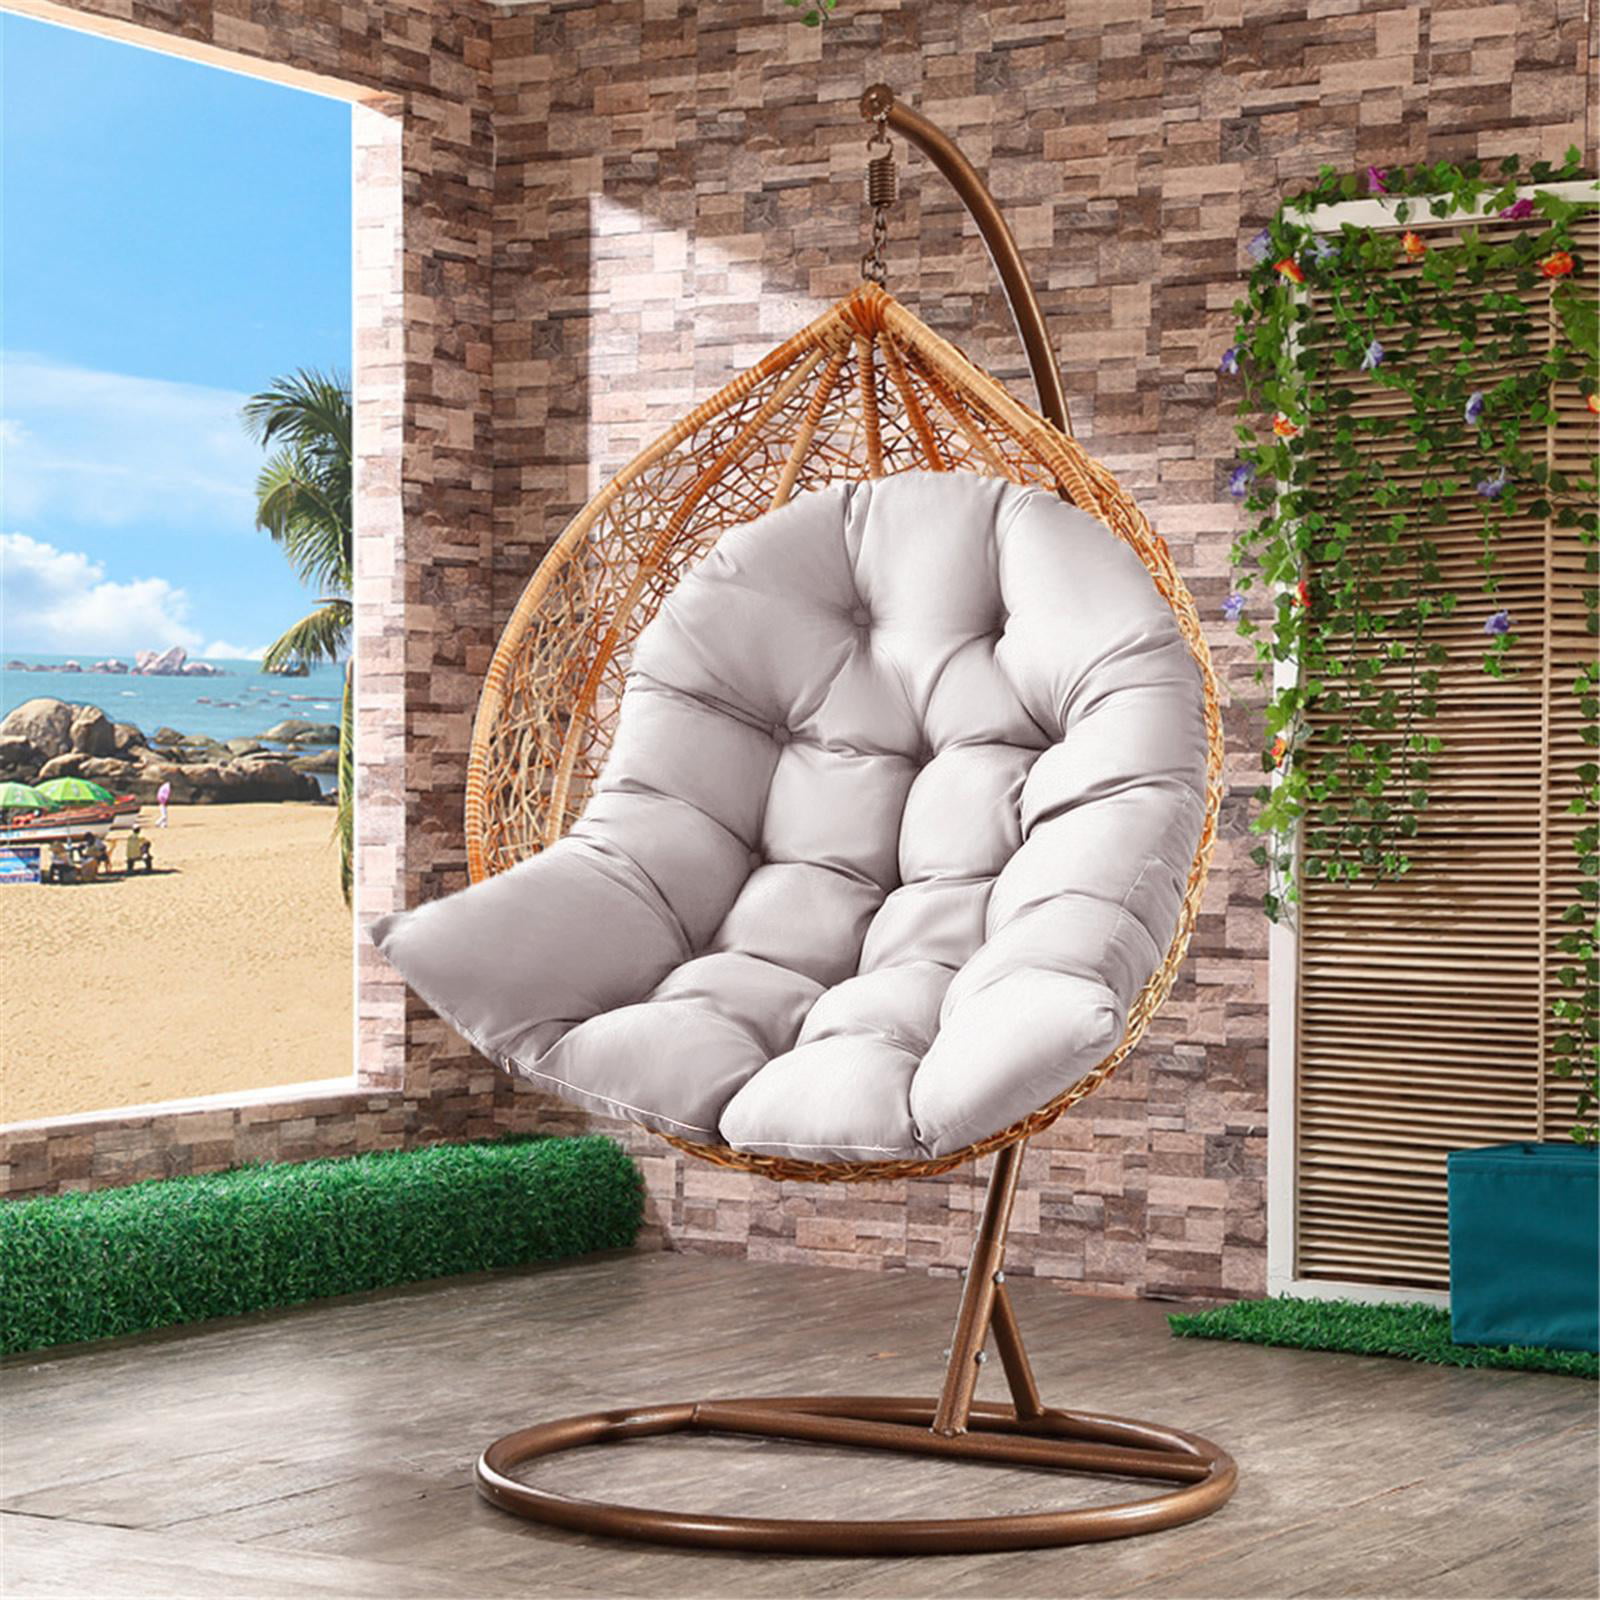  Hanging Basket Chair Cushions, Large Seat Cushion Waterproof  Hanging Egg Hammock Swing Chair Pads Soft Chair Back Solid Color (Color :  Orange, Size : 125x95cm(49x37inch)) : Patio, Lawn & Garden